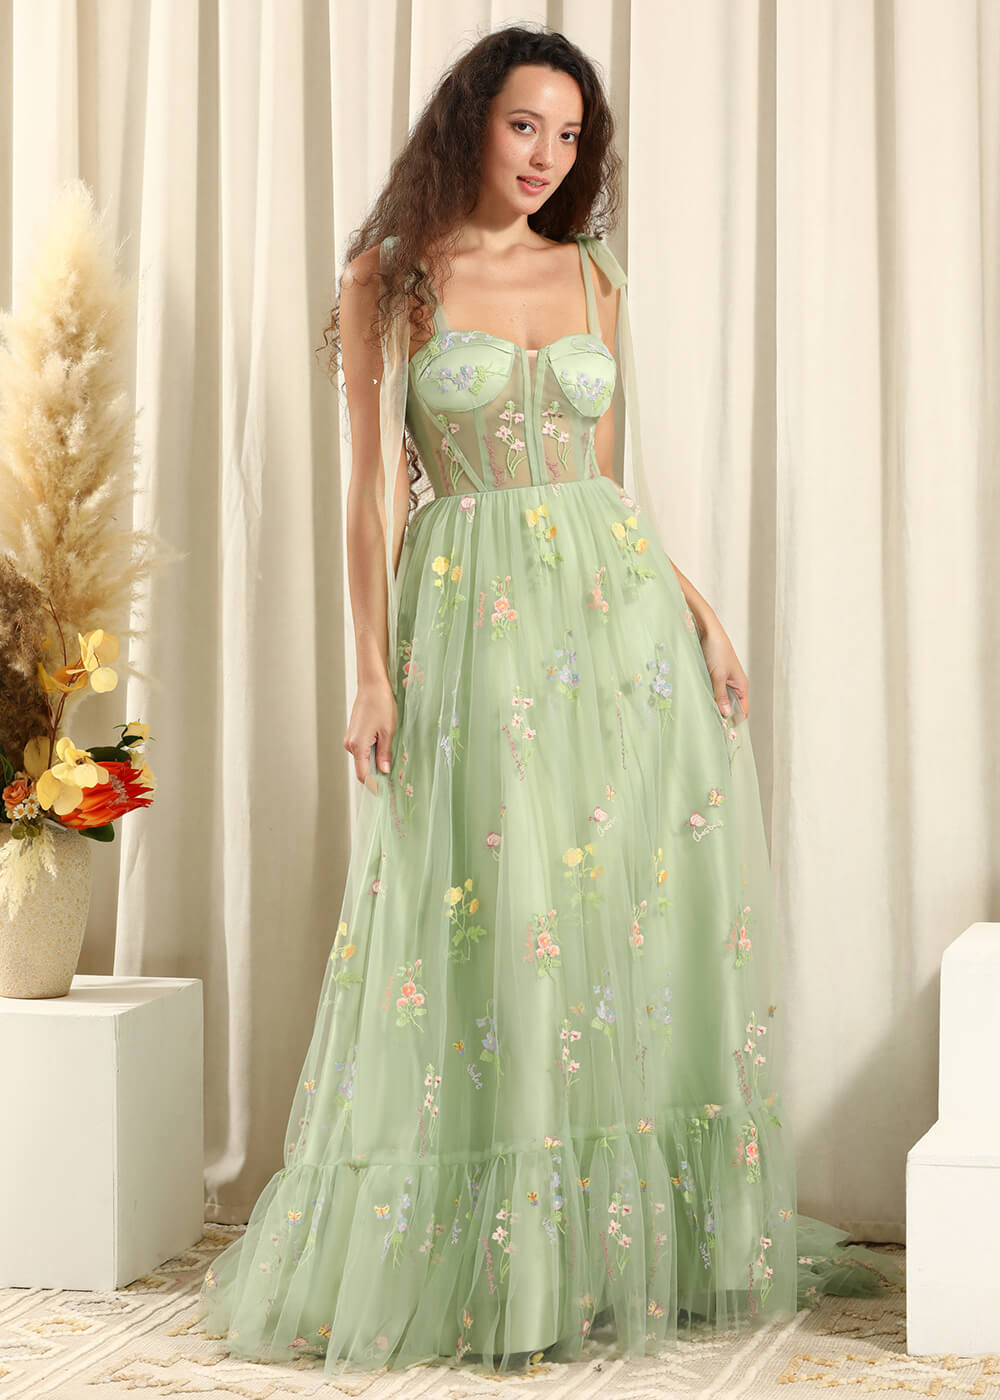 Green Tulle Flower Embroidery Adjustable Strap A-line Long Bridesmaid Dress